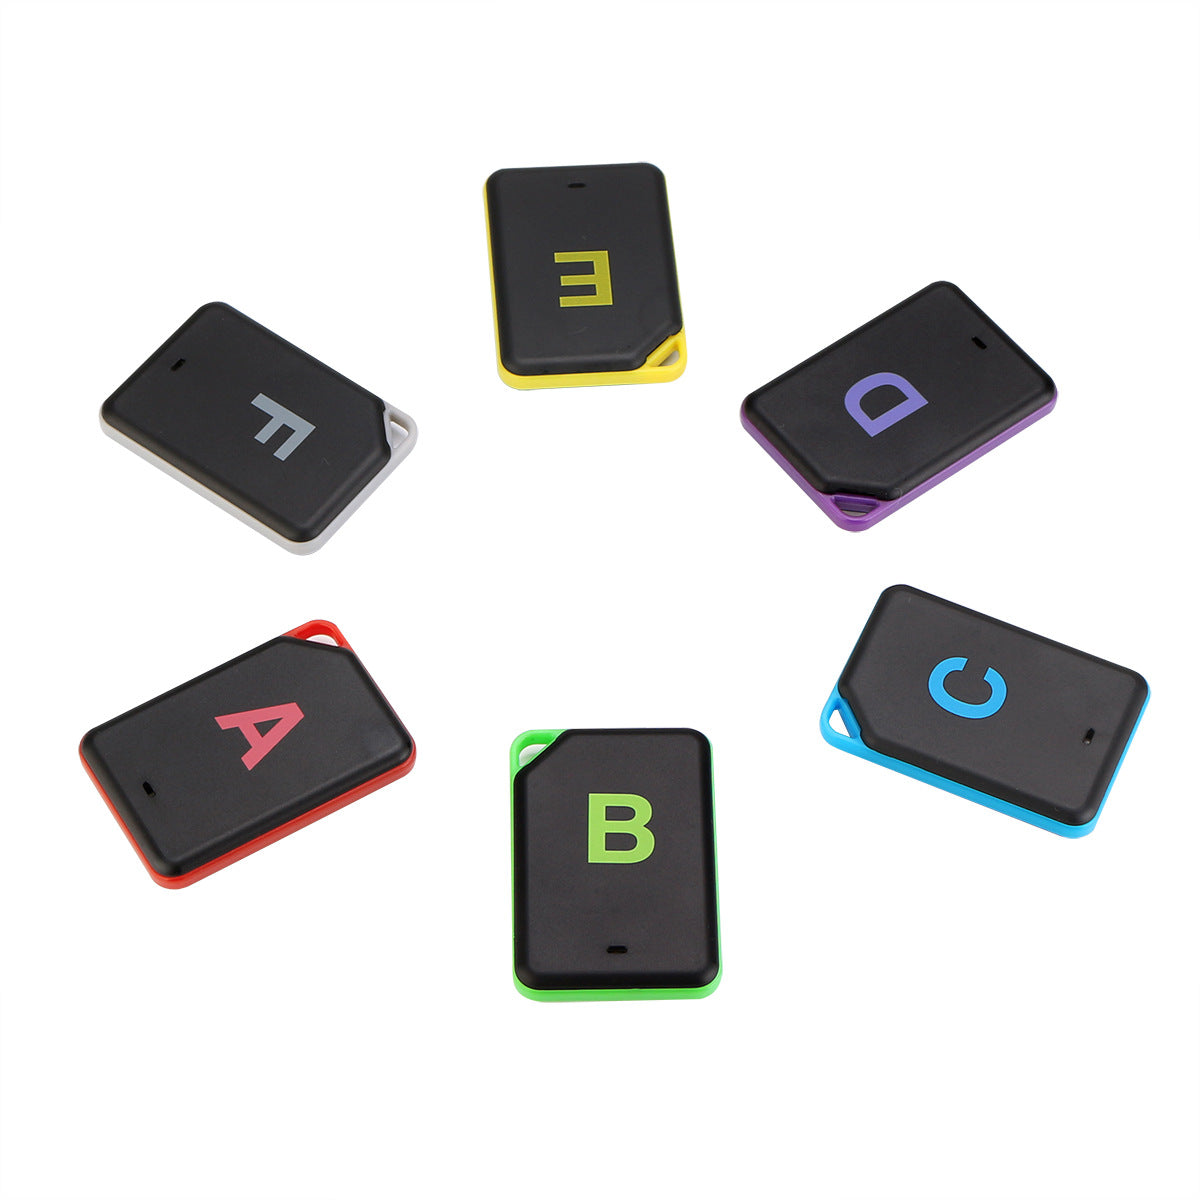 Six rectangle-shaped item locators are laid out, each a different color with a bold letter from A to F on the top right corner, adjacent to key icons.